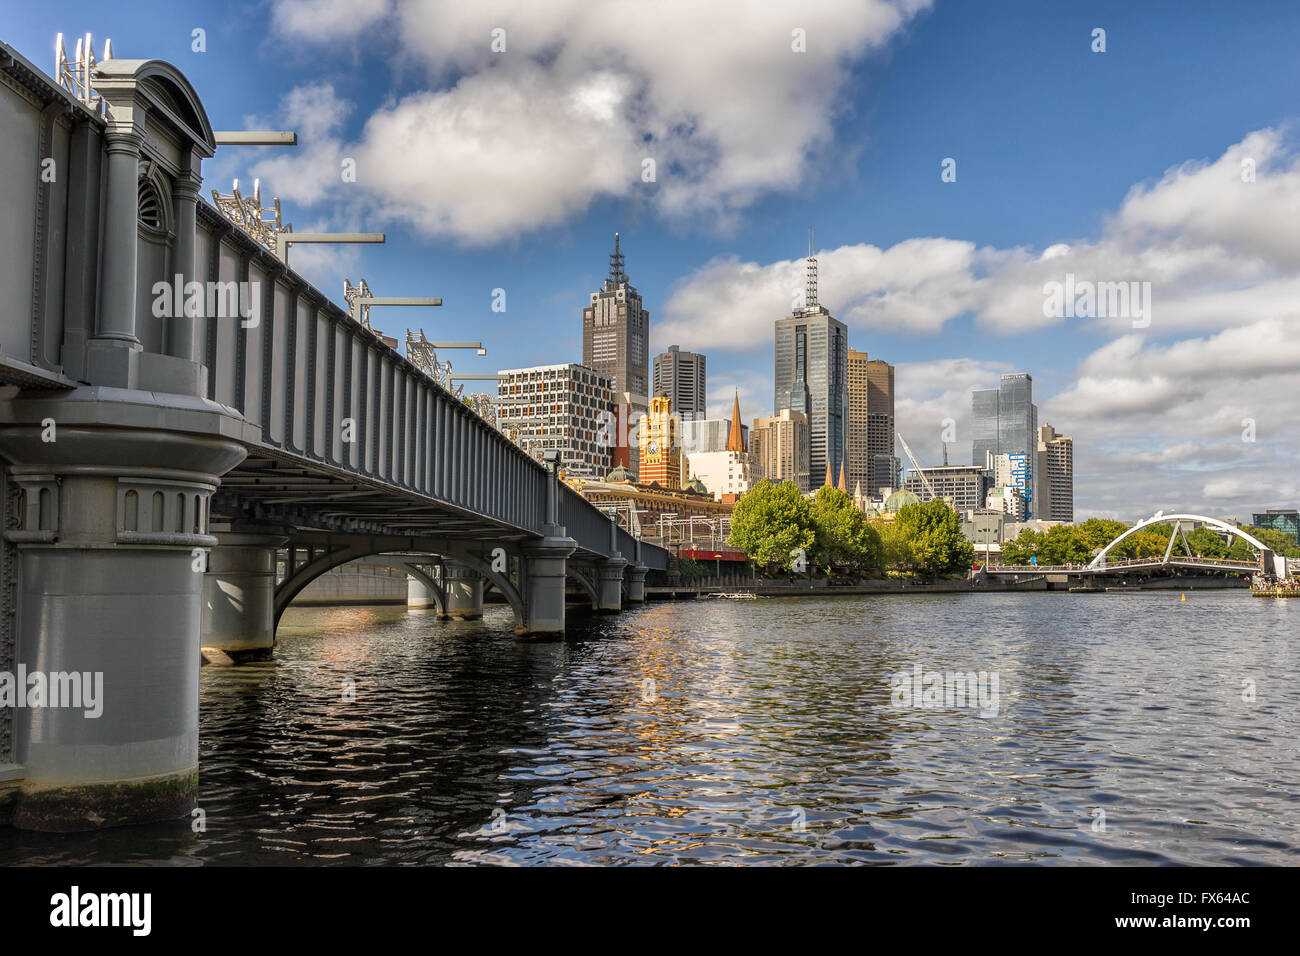 Looking across the Yarra River to Melbourne city Stock Photo